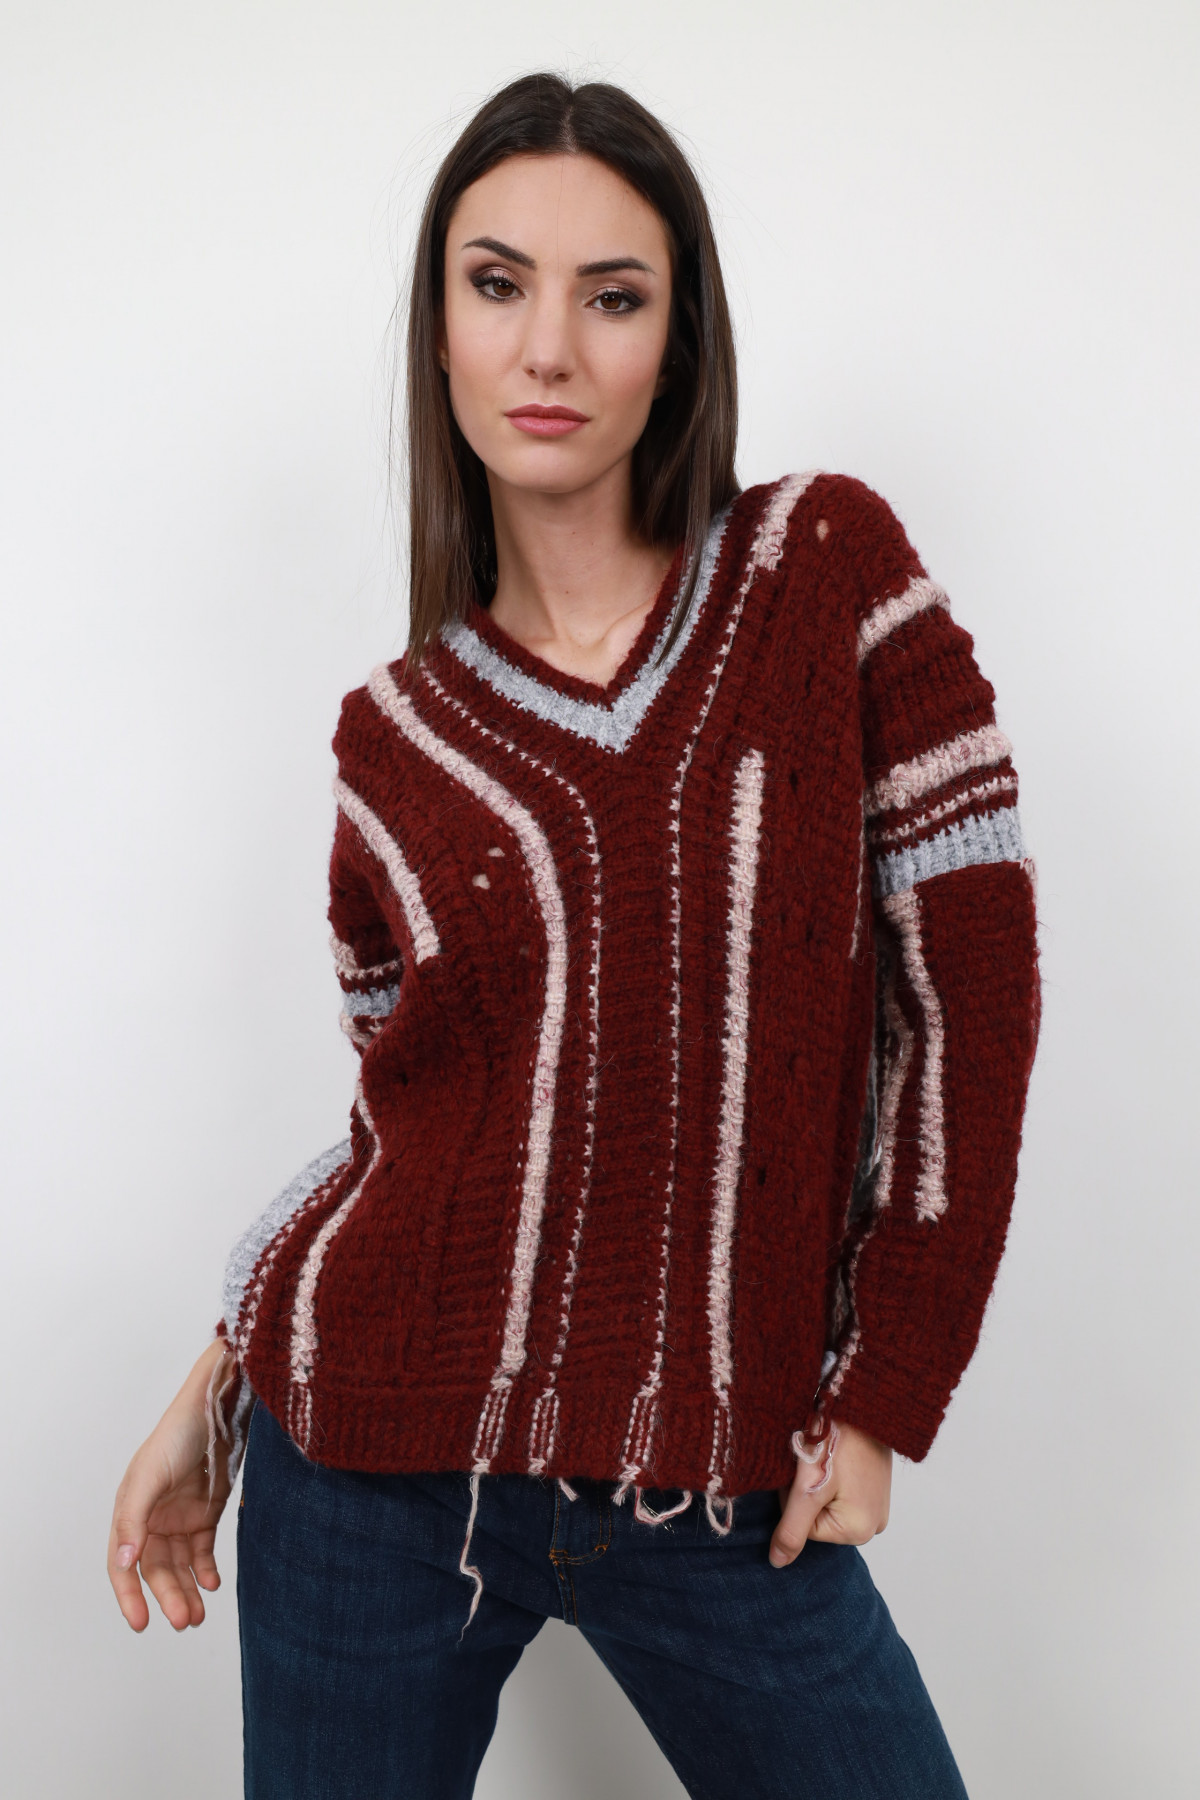 Bicolor fringed sweater